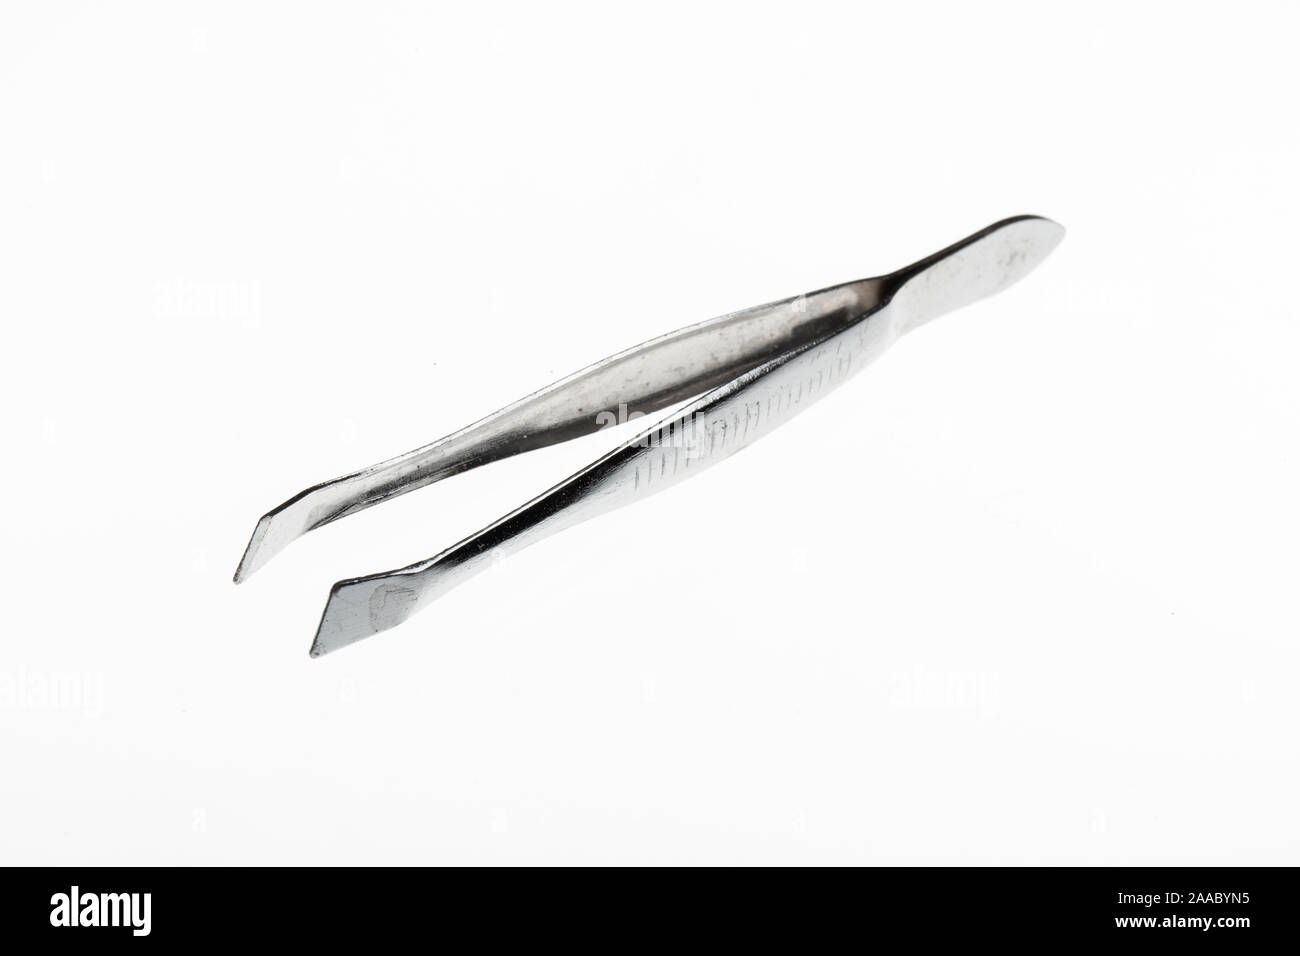 Metal tweezer isolated on a white background Stock Photo